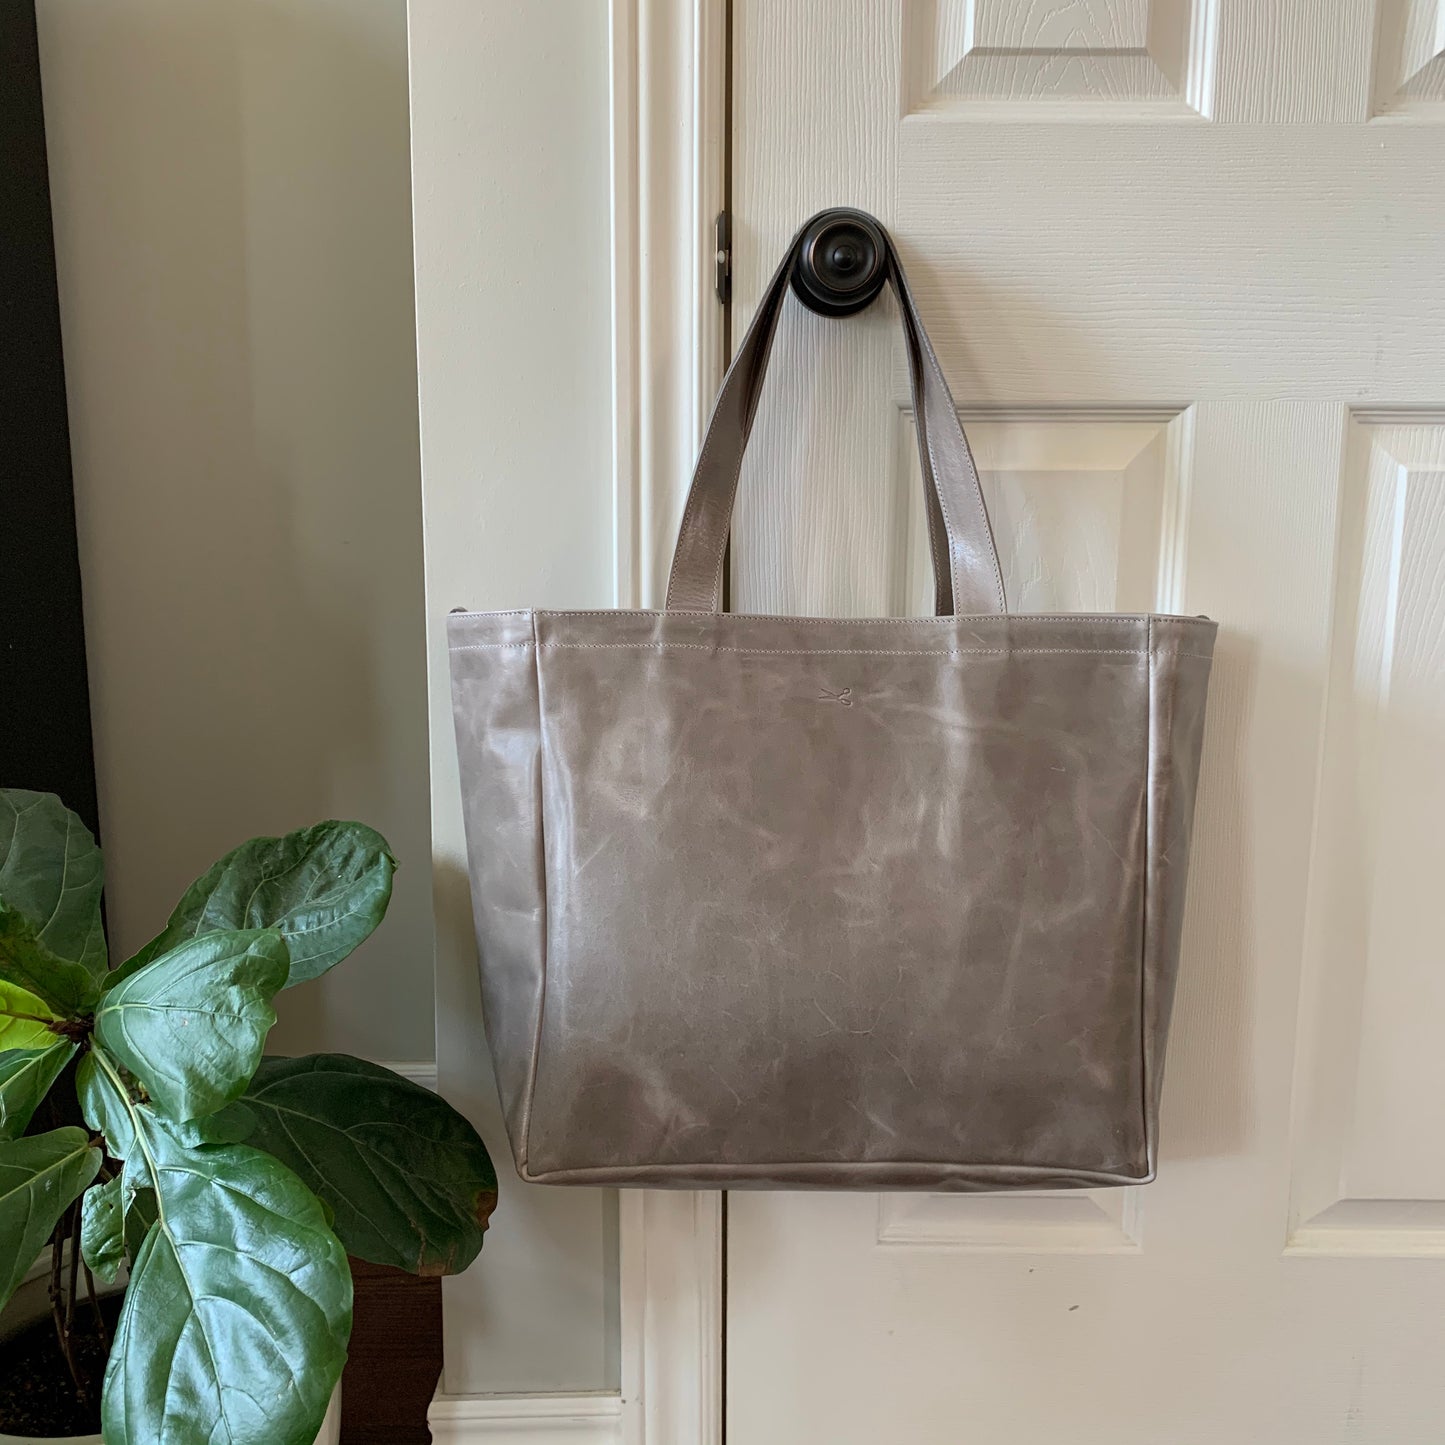 PREORDER - Everything Leather Tote Bag